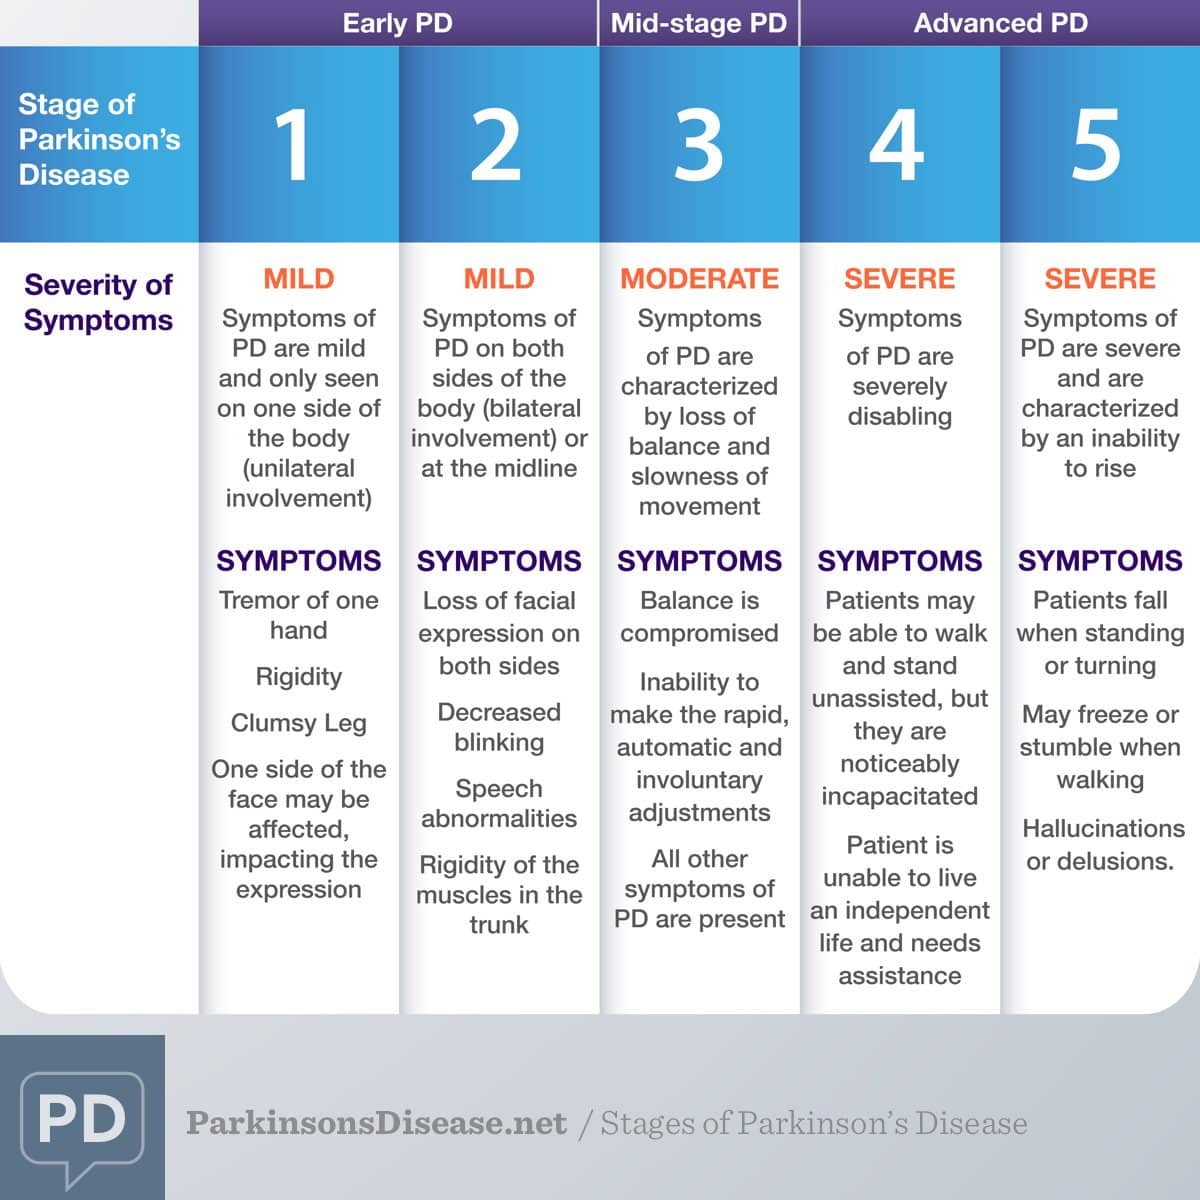 What Is Stage 5 Parkinson